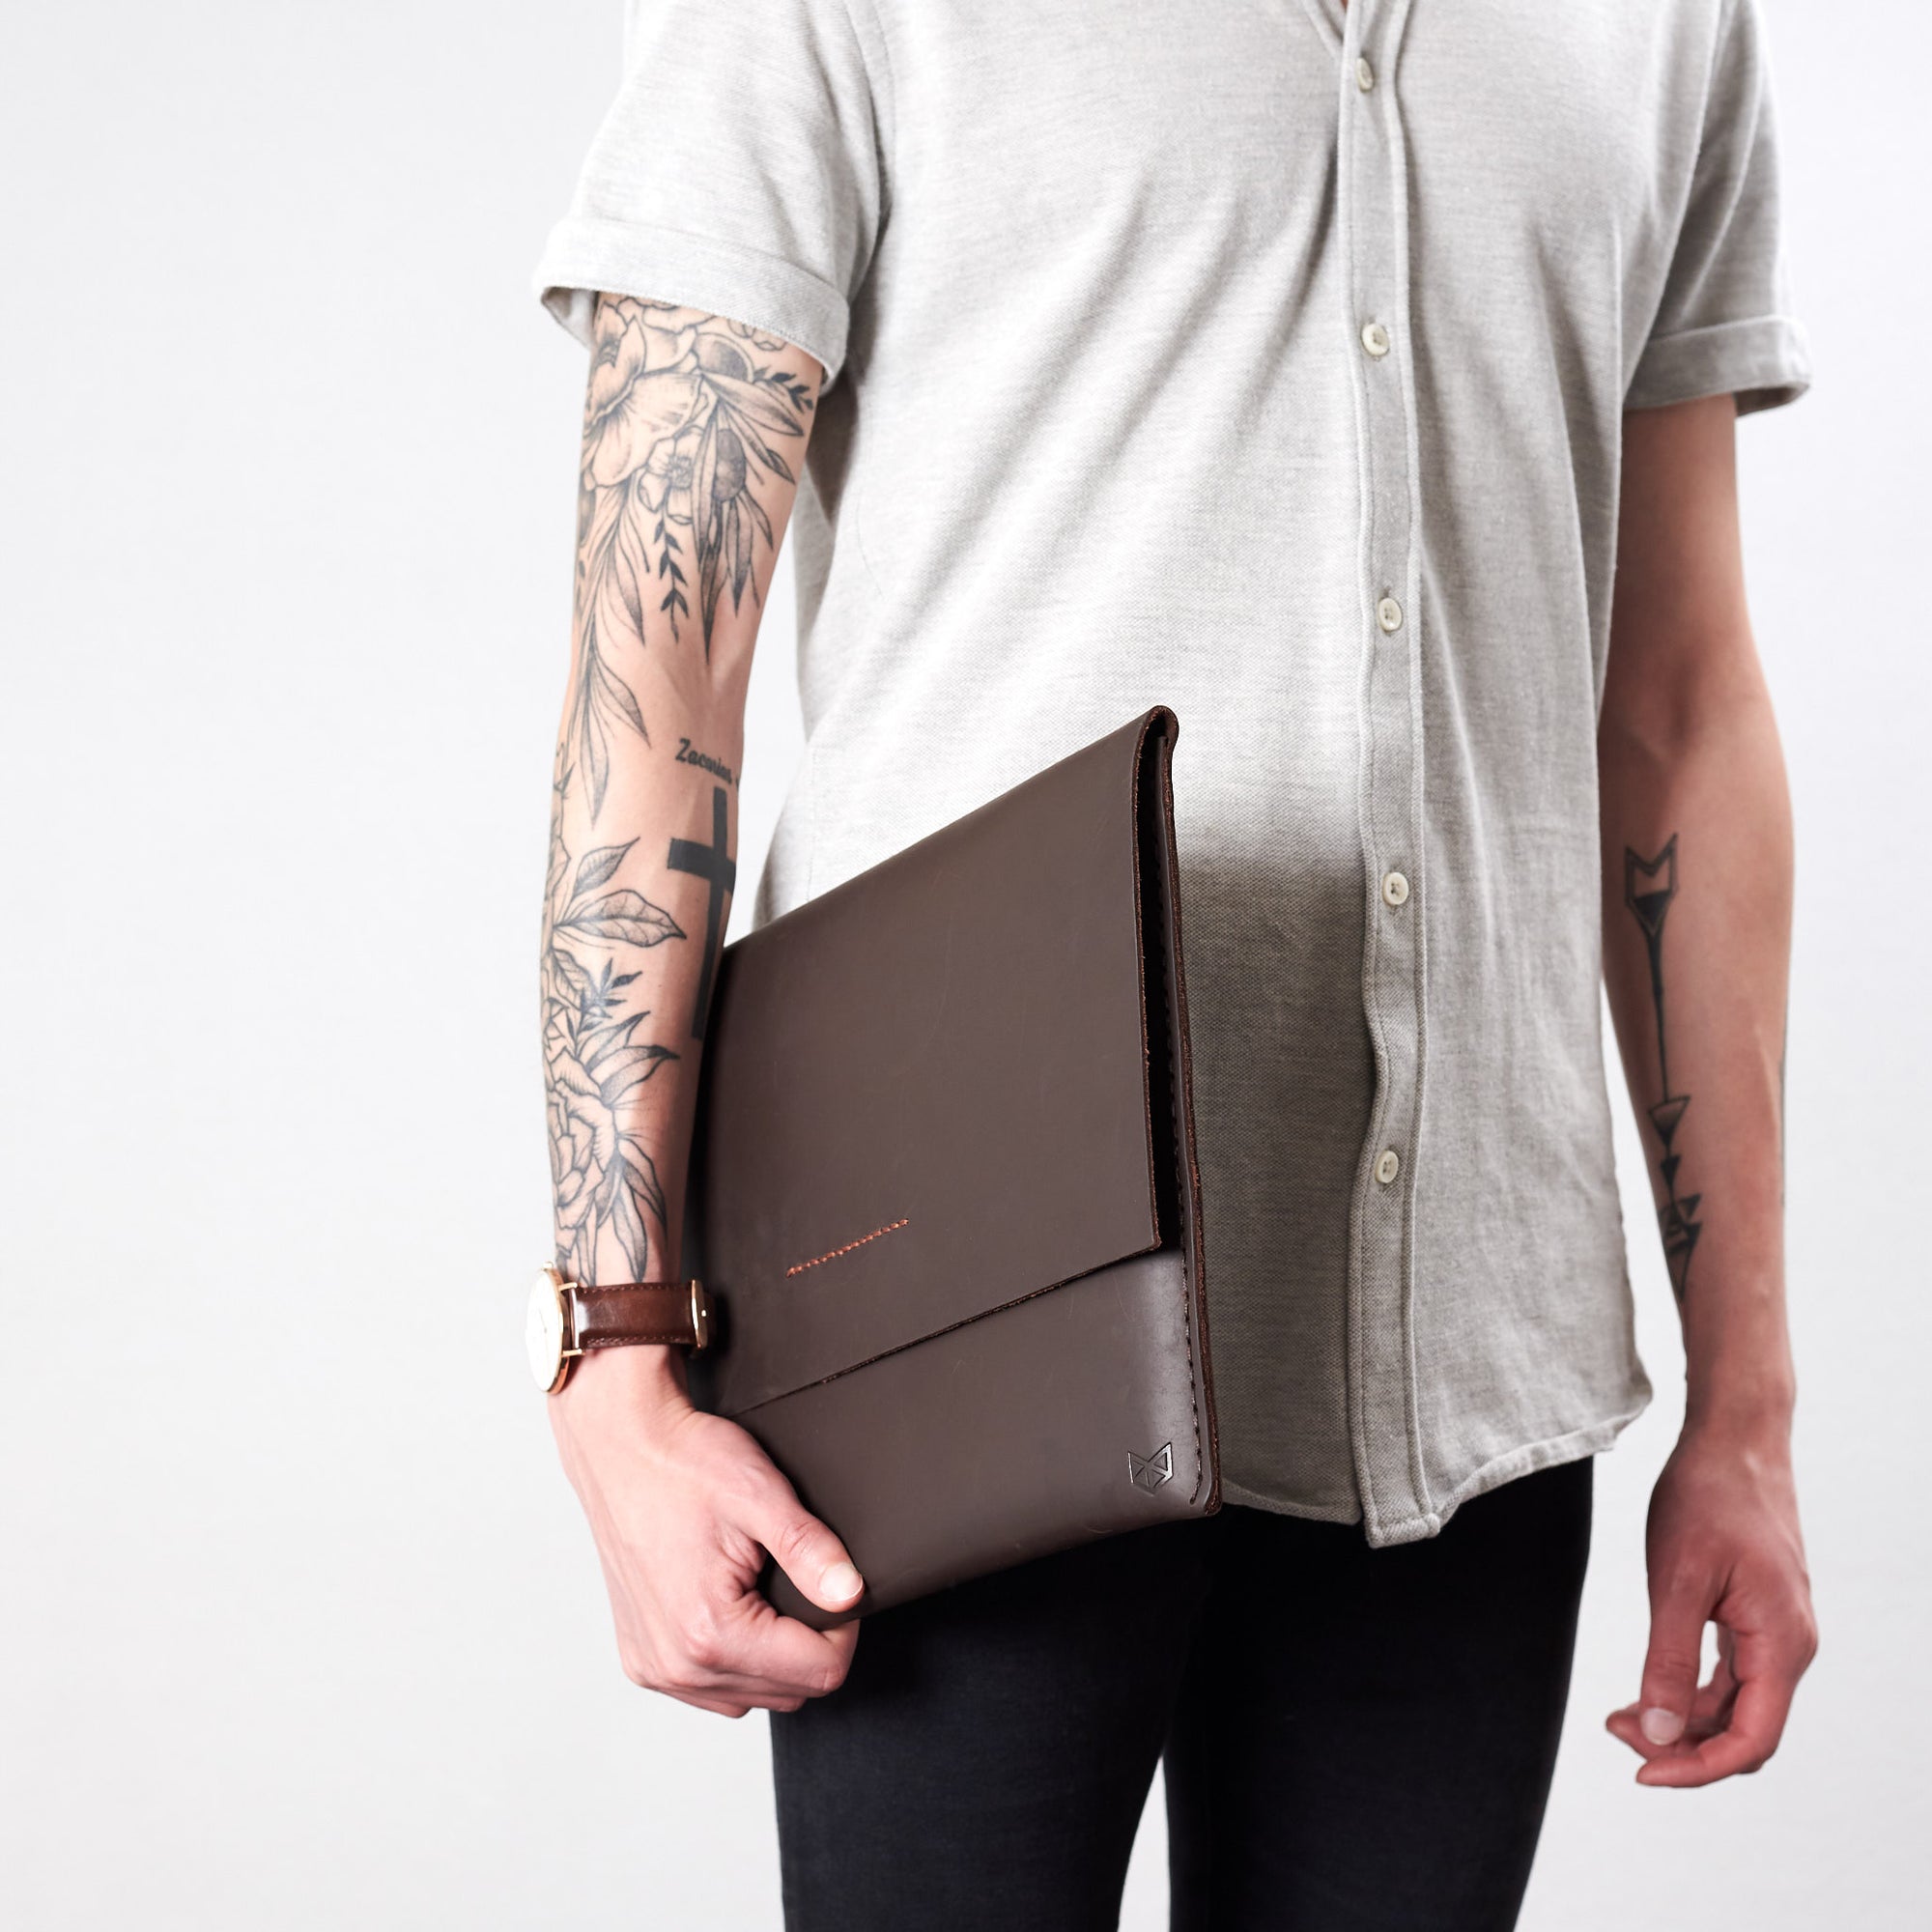 Style front view. Marron draftsman 1 case by Capra Leather. Microsoft Surface sleeve.